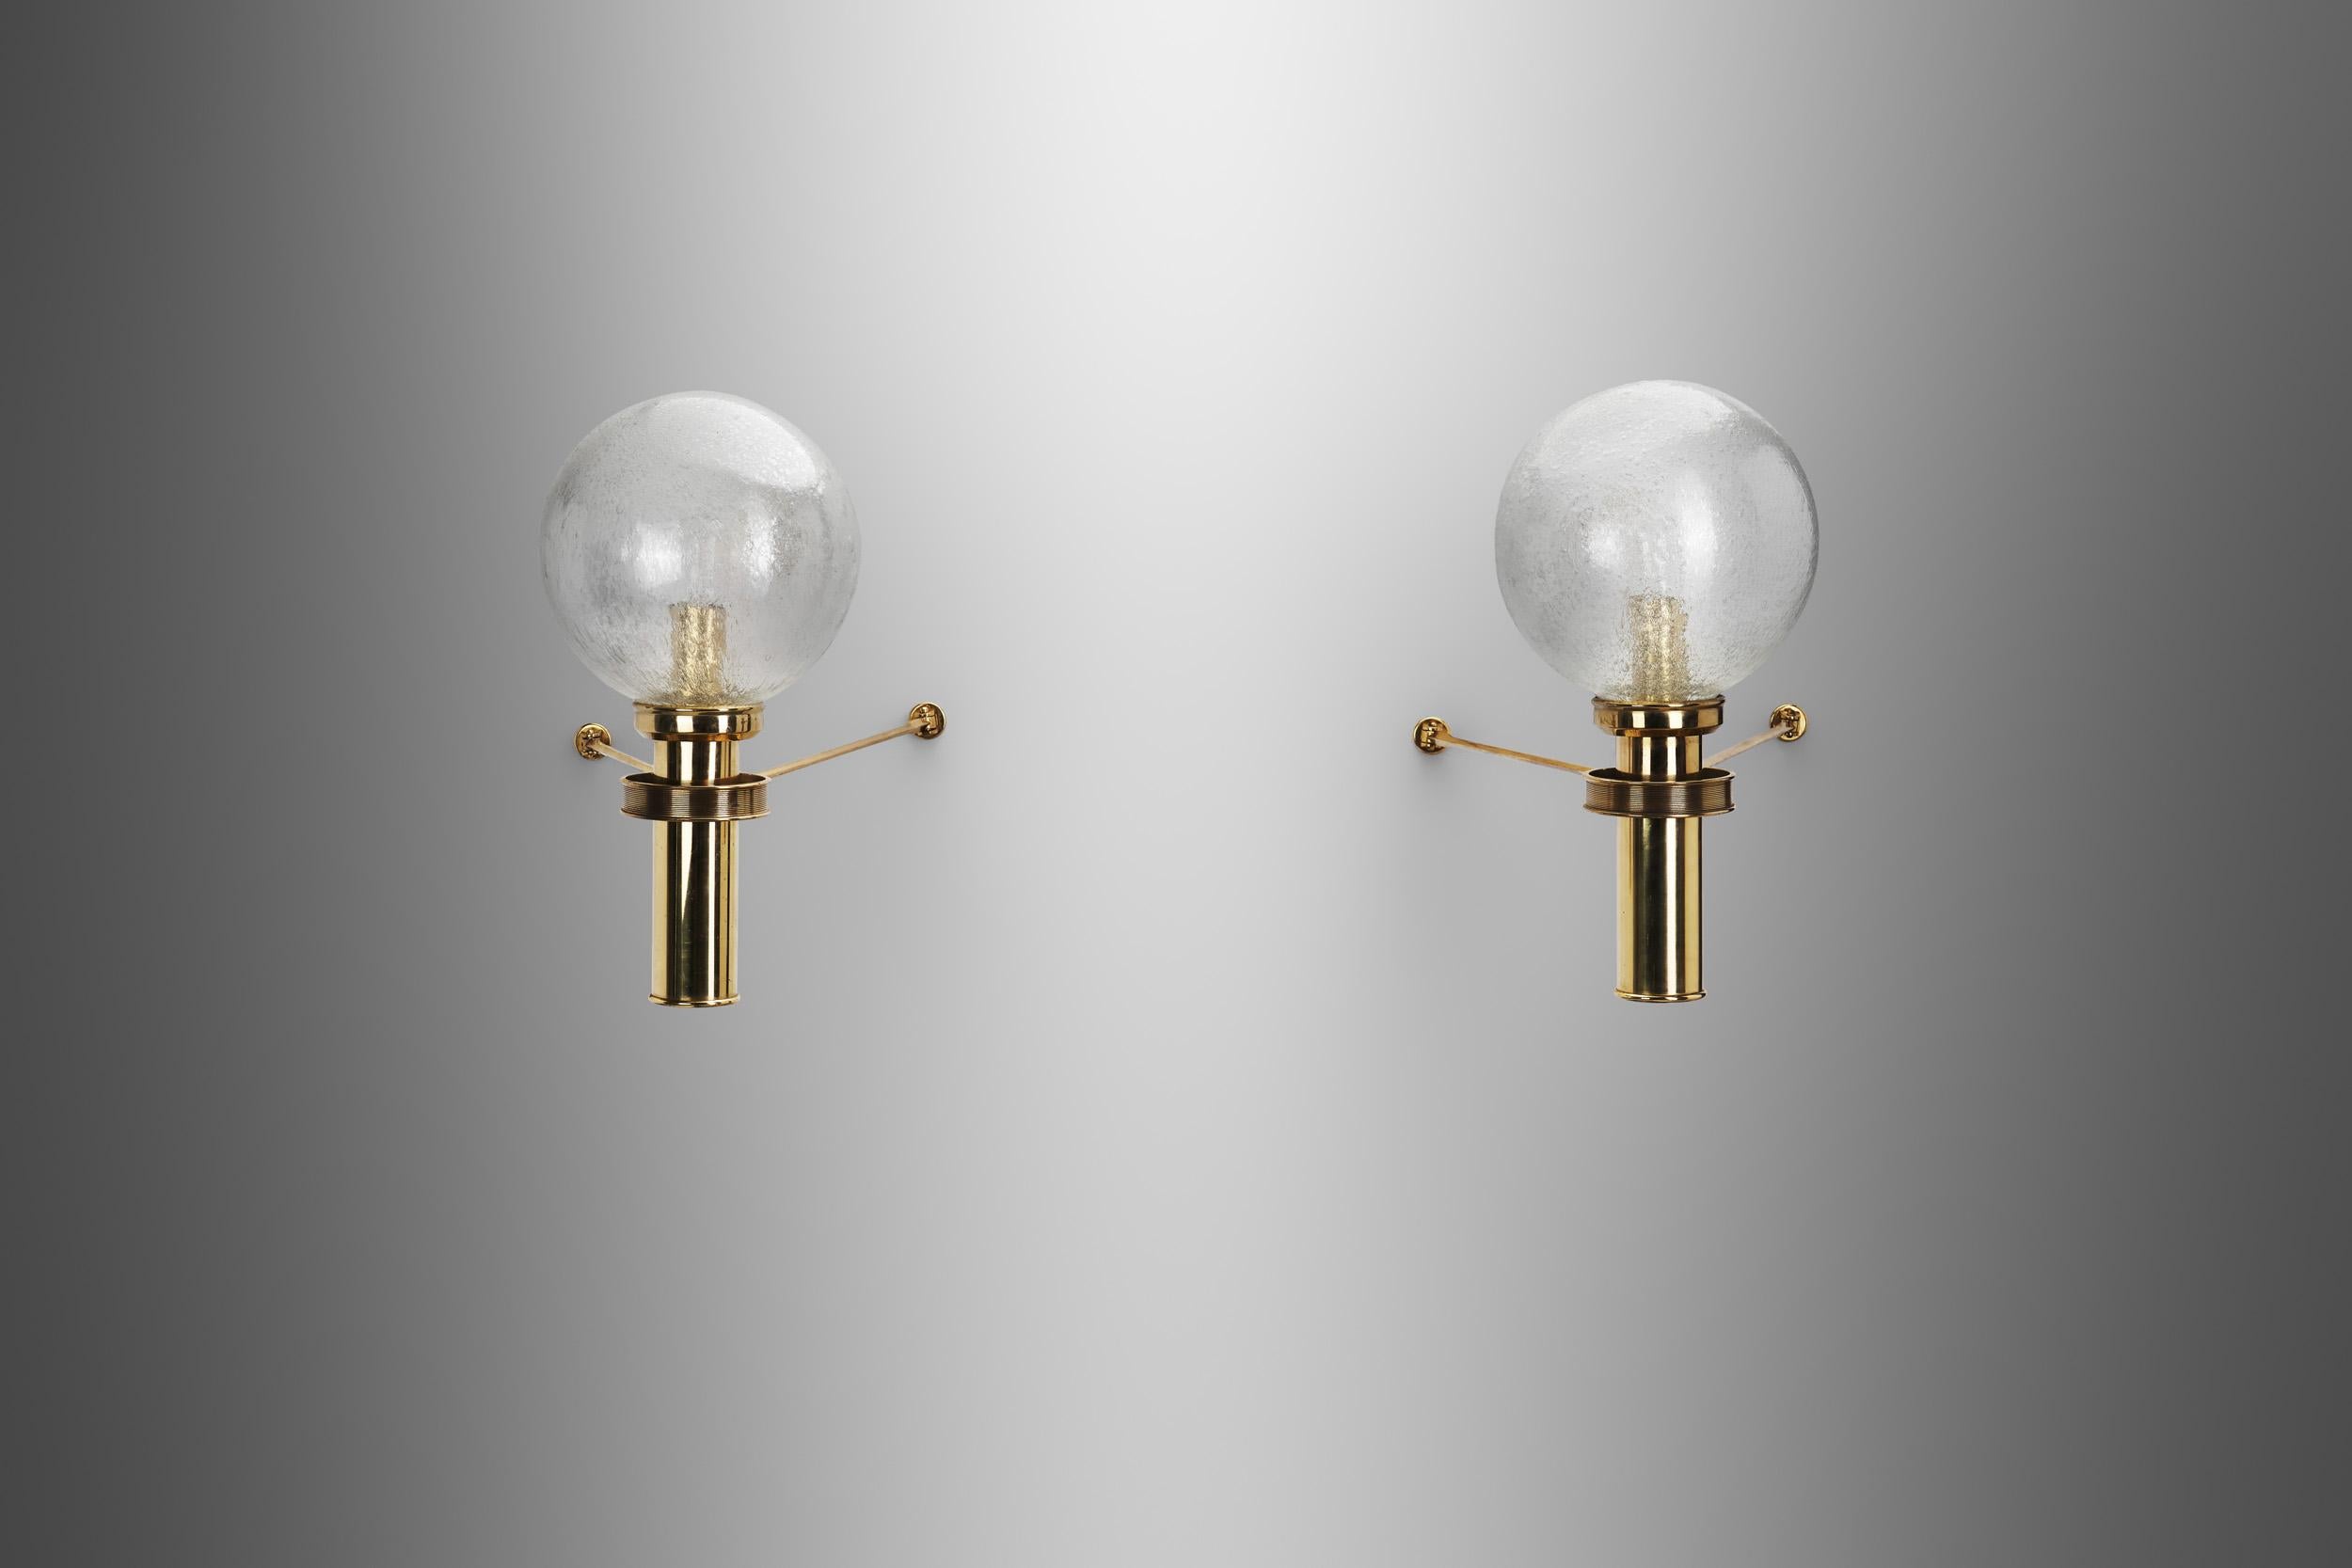 Large European Modern Wall Sconces in Brass & Bubble Glass, Europe, circa 1950s For Sale 1